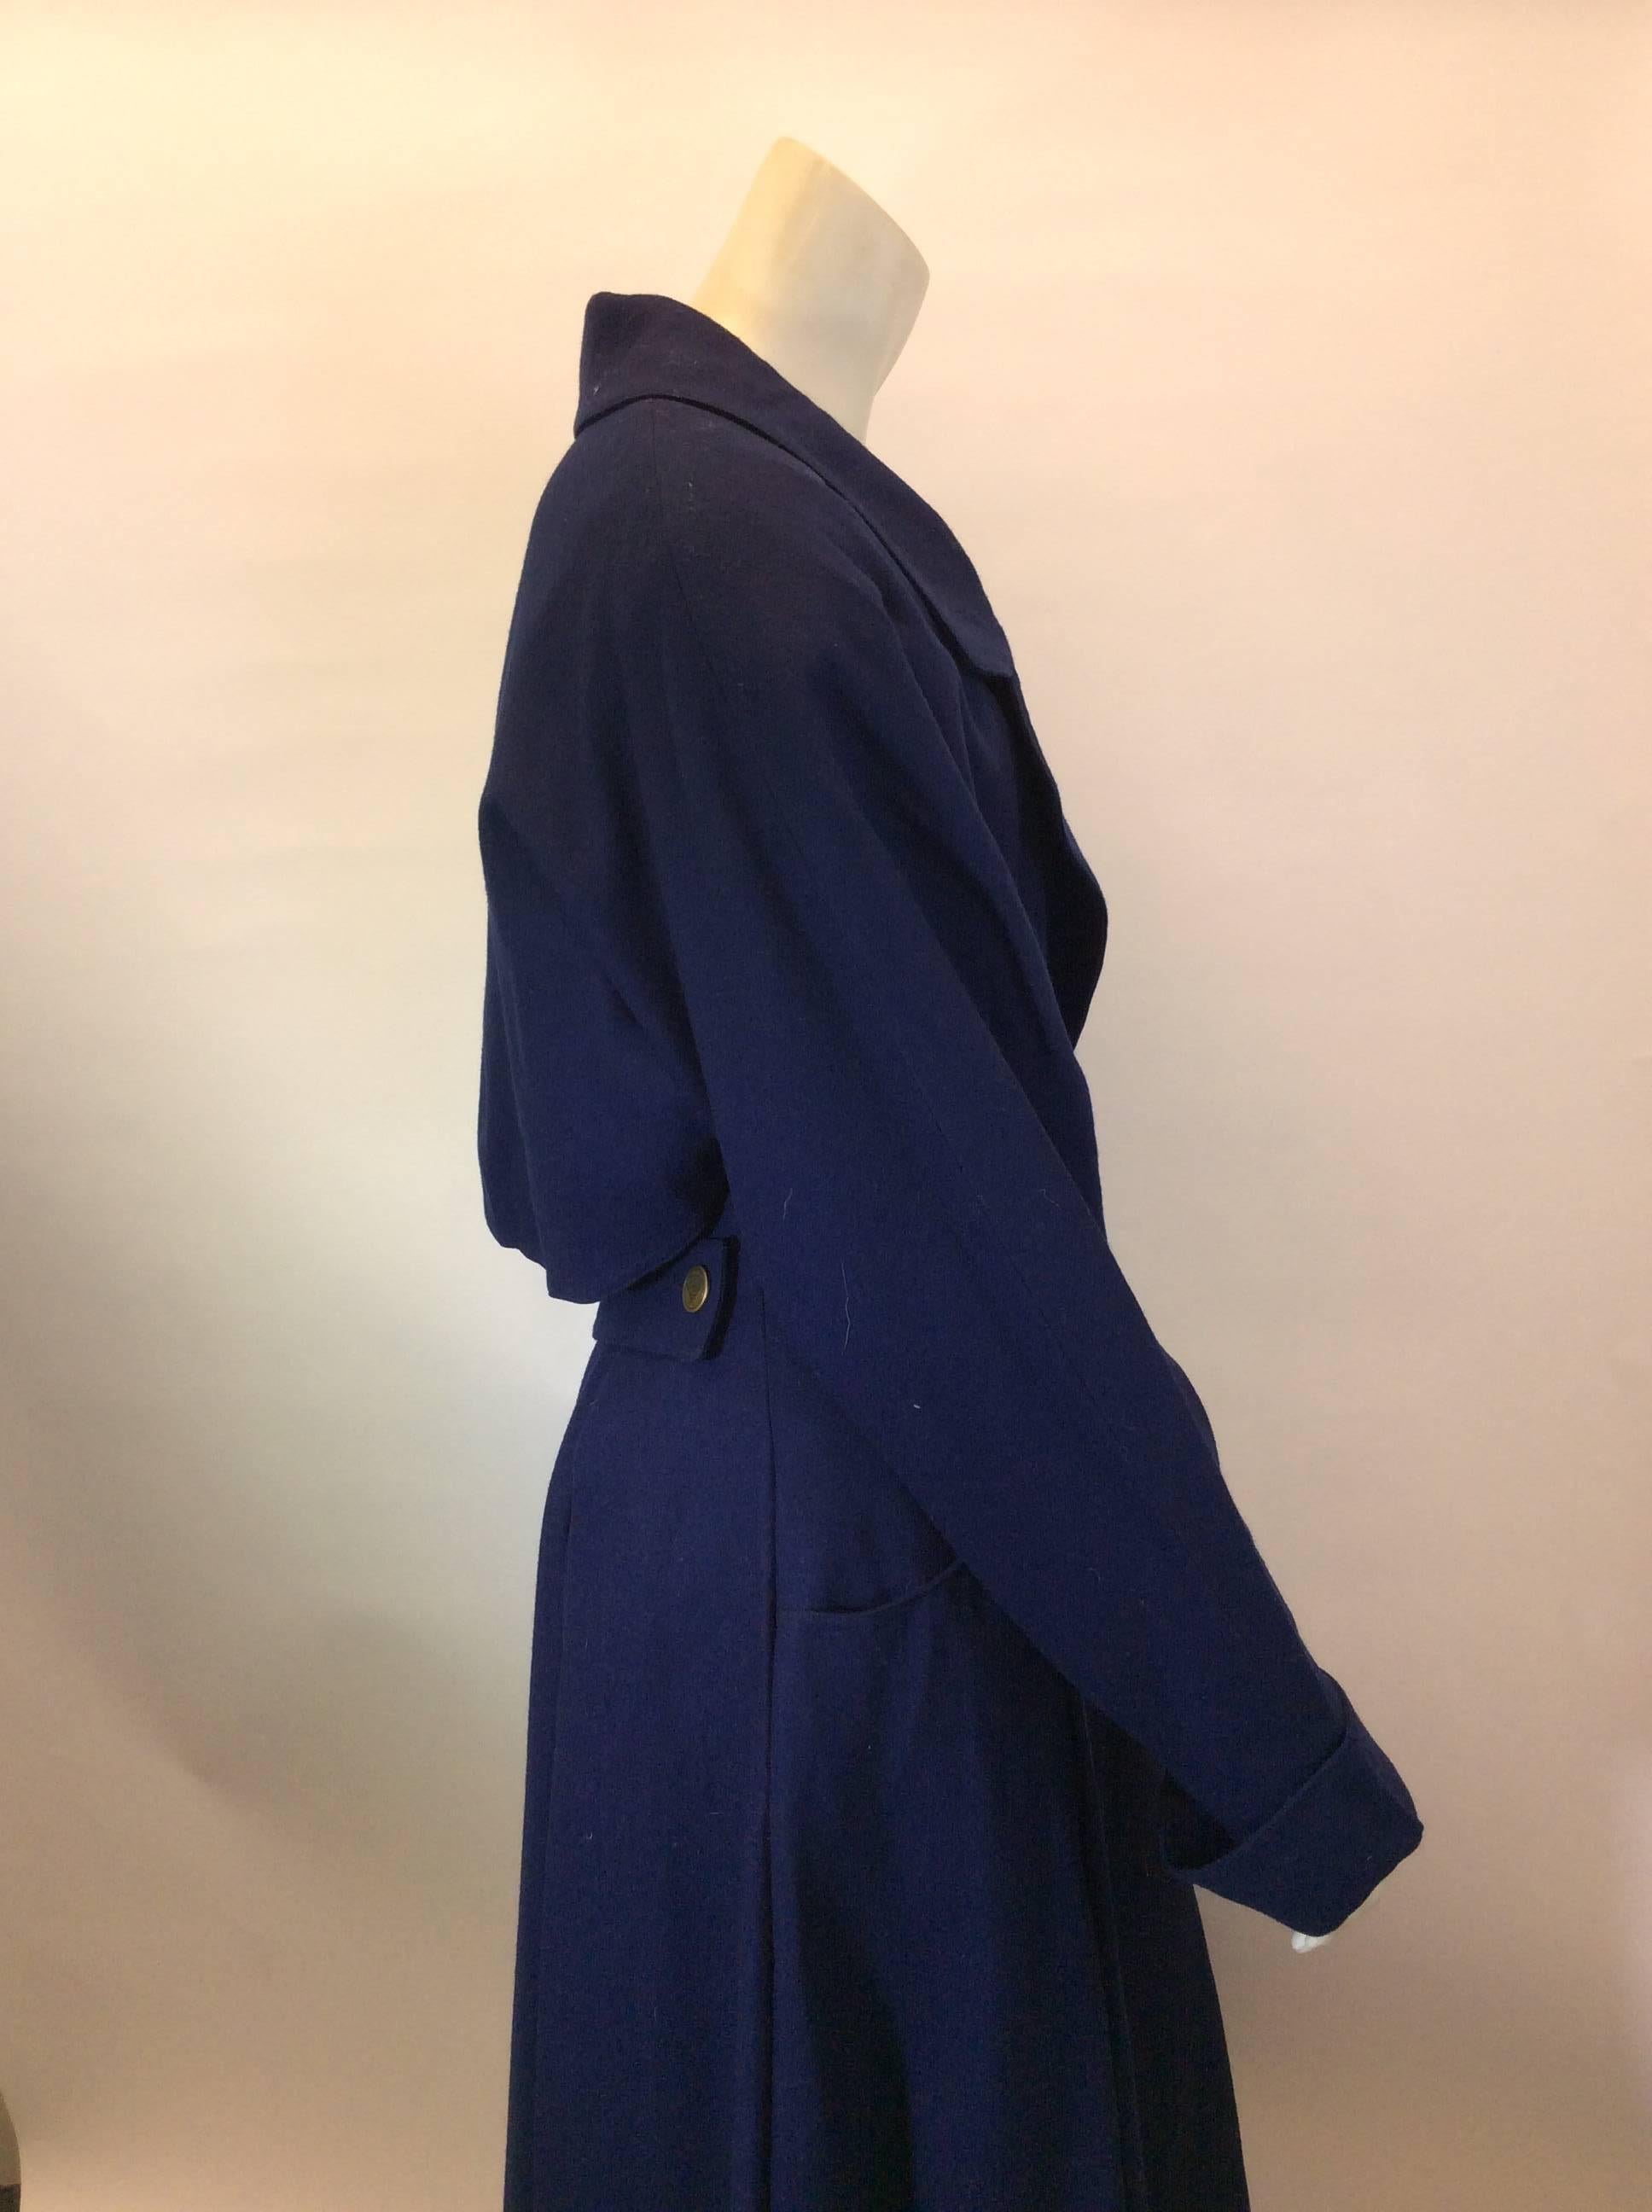 Midnight Blue Overcoat
Buttoned front closure
Two side pockets
Folded cuff
Size 38 (equates to US 6)
100% Wool
